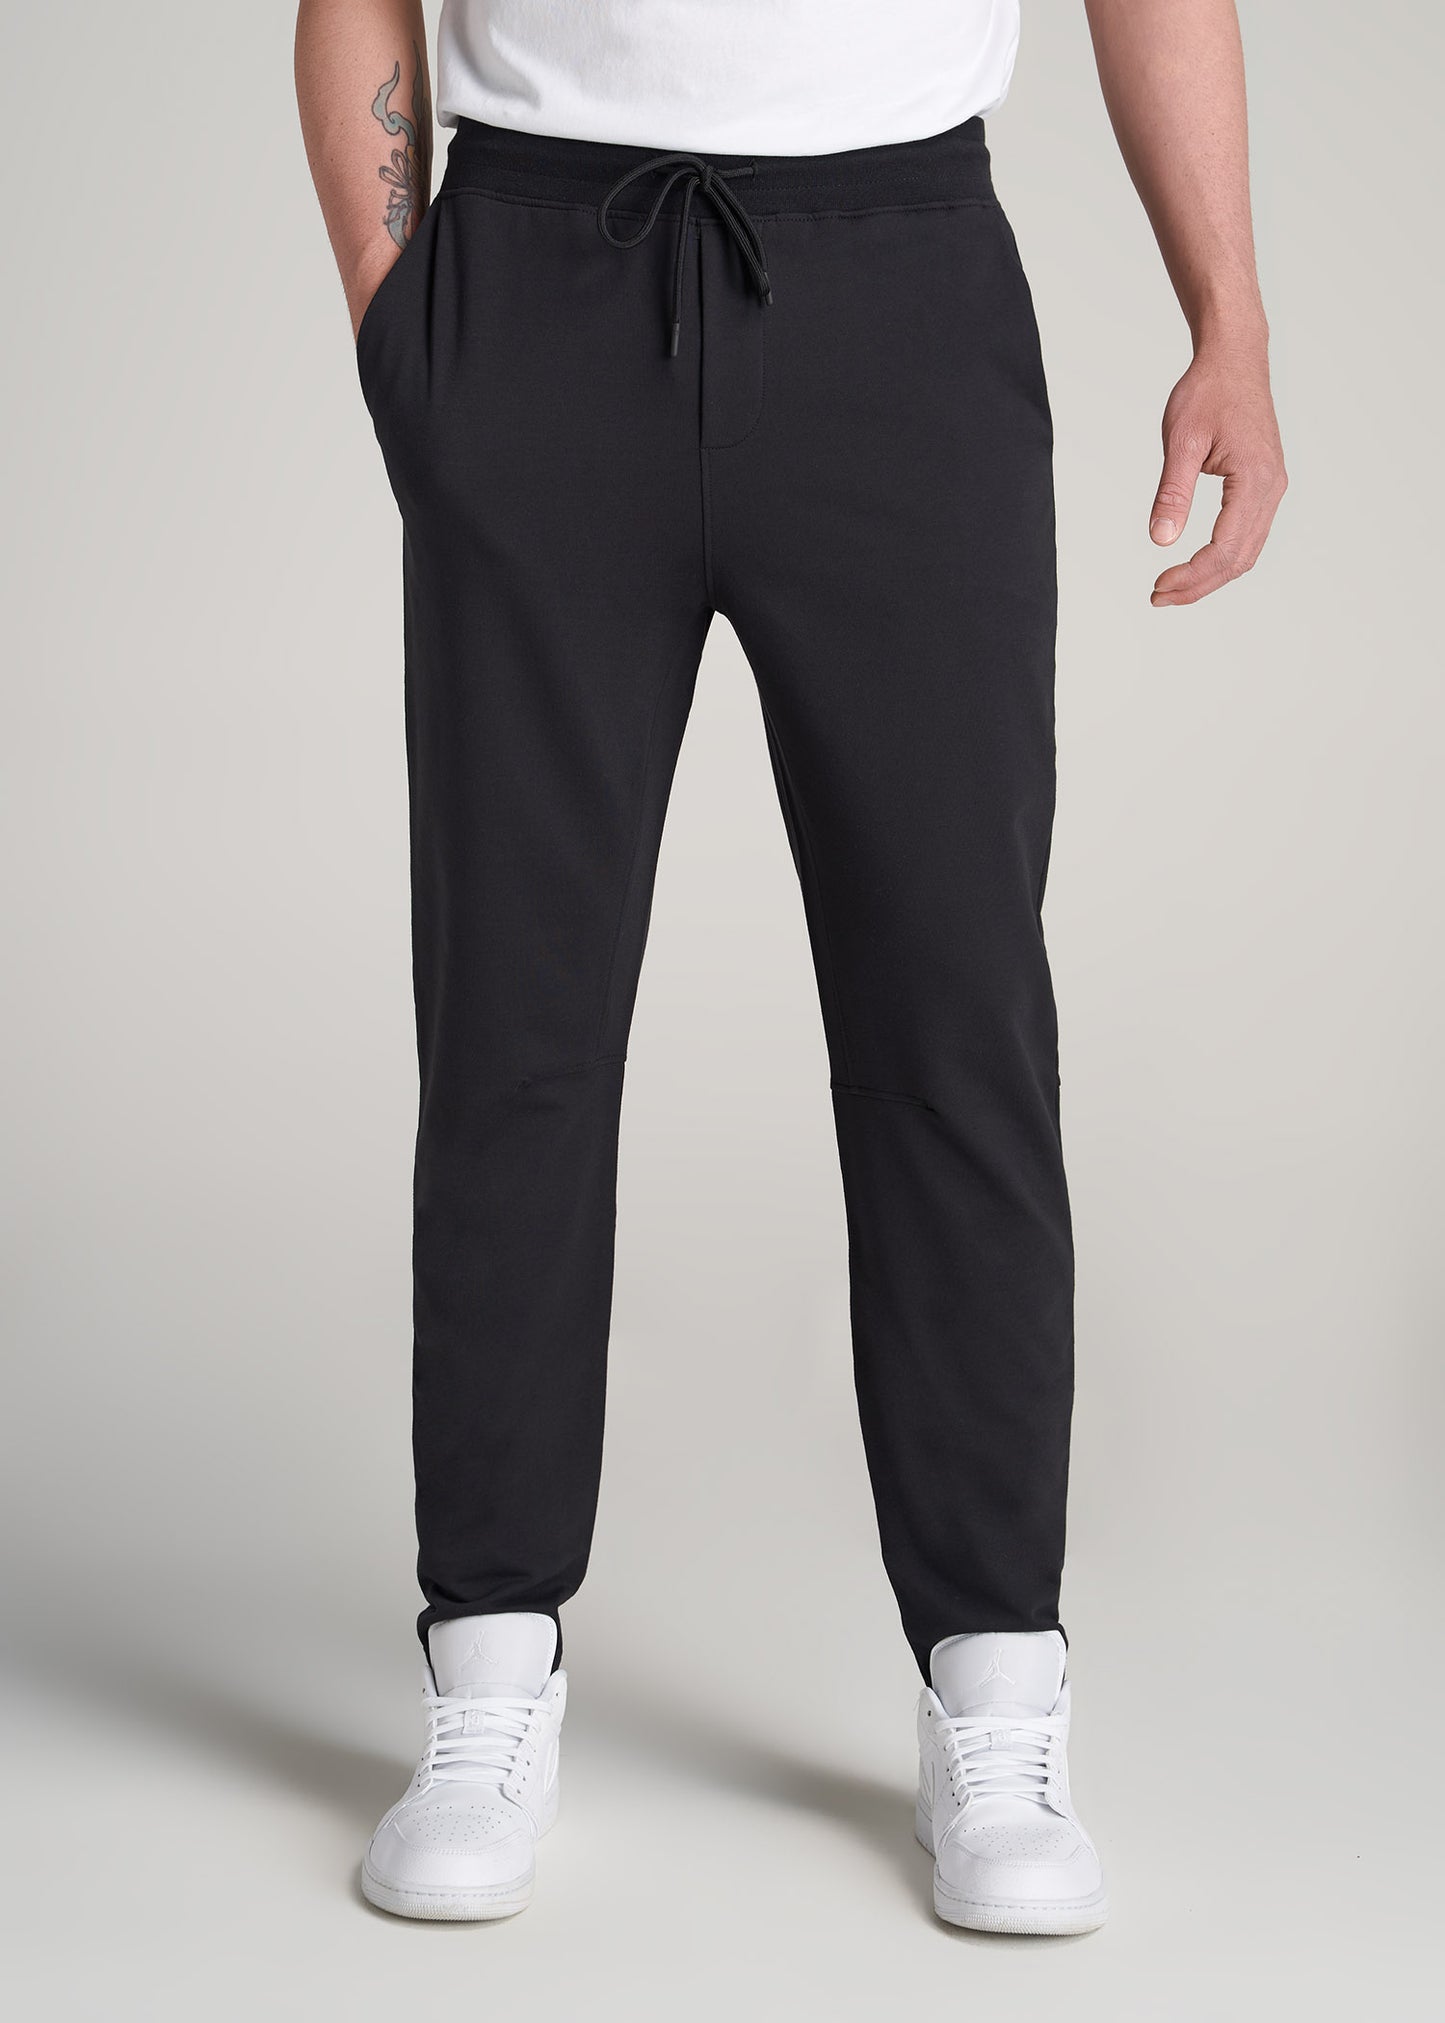 A.T. Performance French Terry Sweatpants for Tall Men in Tech Navy Mix